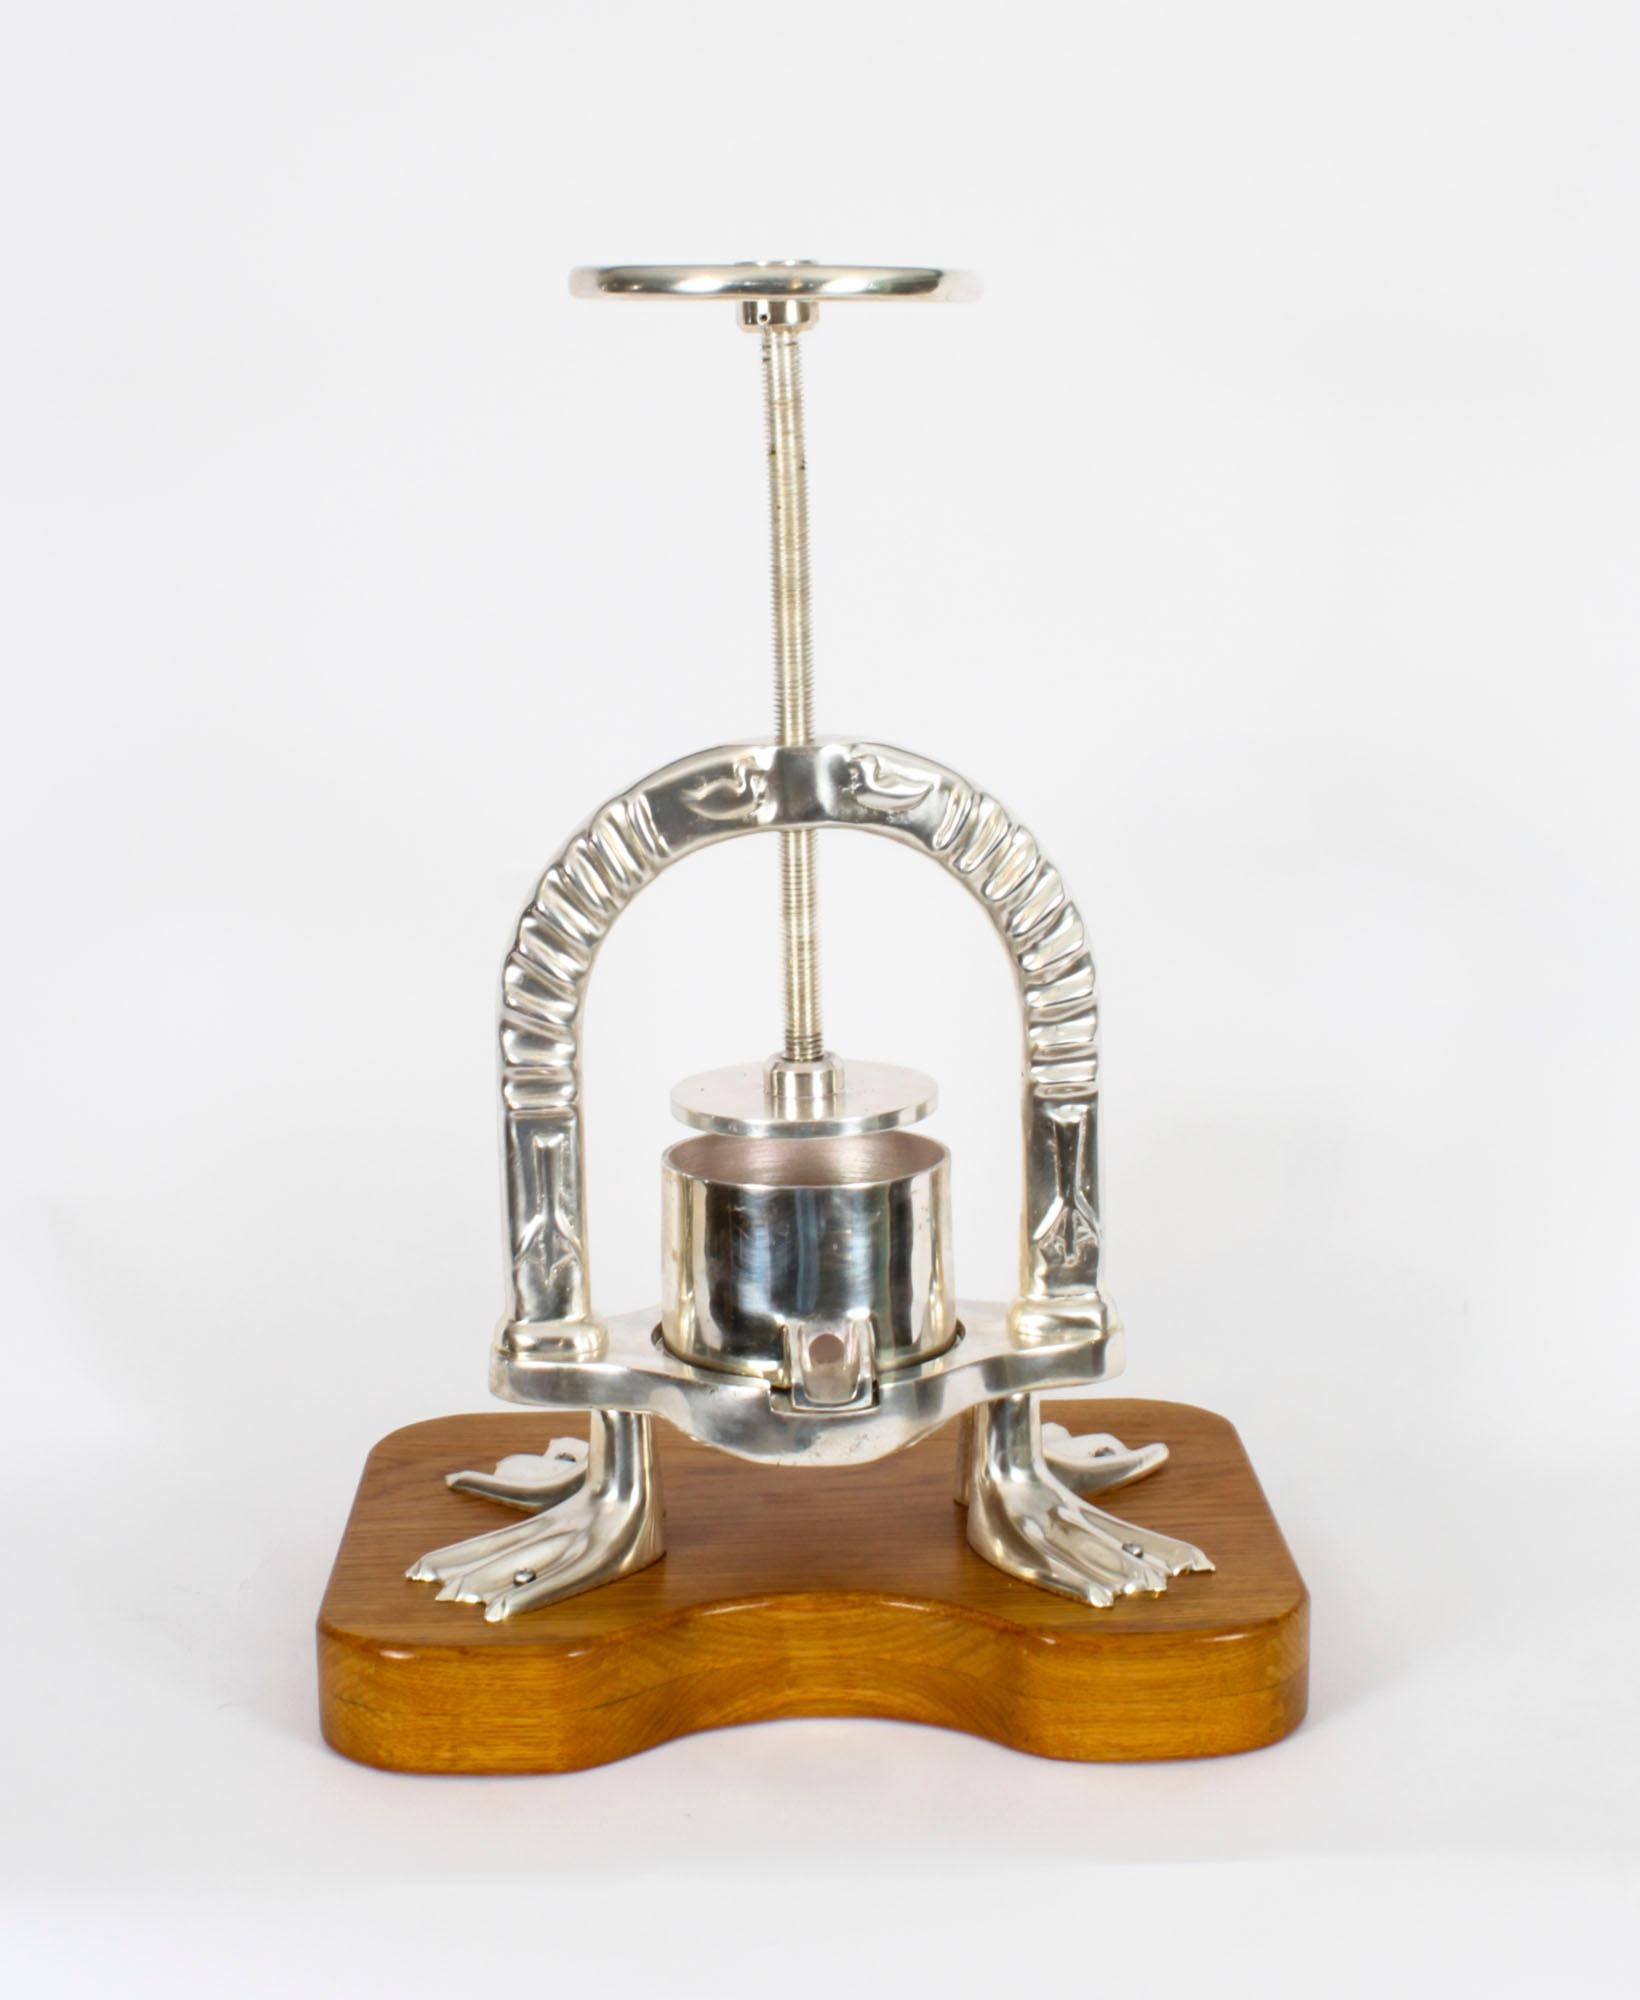 This is a fine substantial antique French silver plated Duck Press, late 19th century in date.
The duck press has decorative embossed decoration, with ducks, etc, and stands on four substantial legs fashioned as webbed duck feet. It is mounted on a